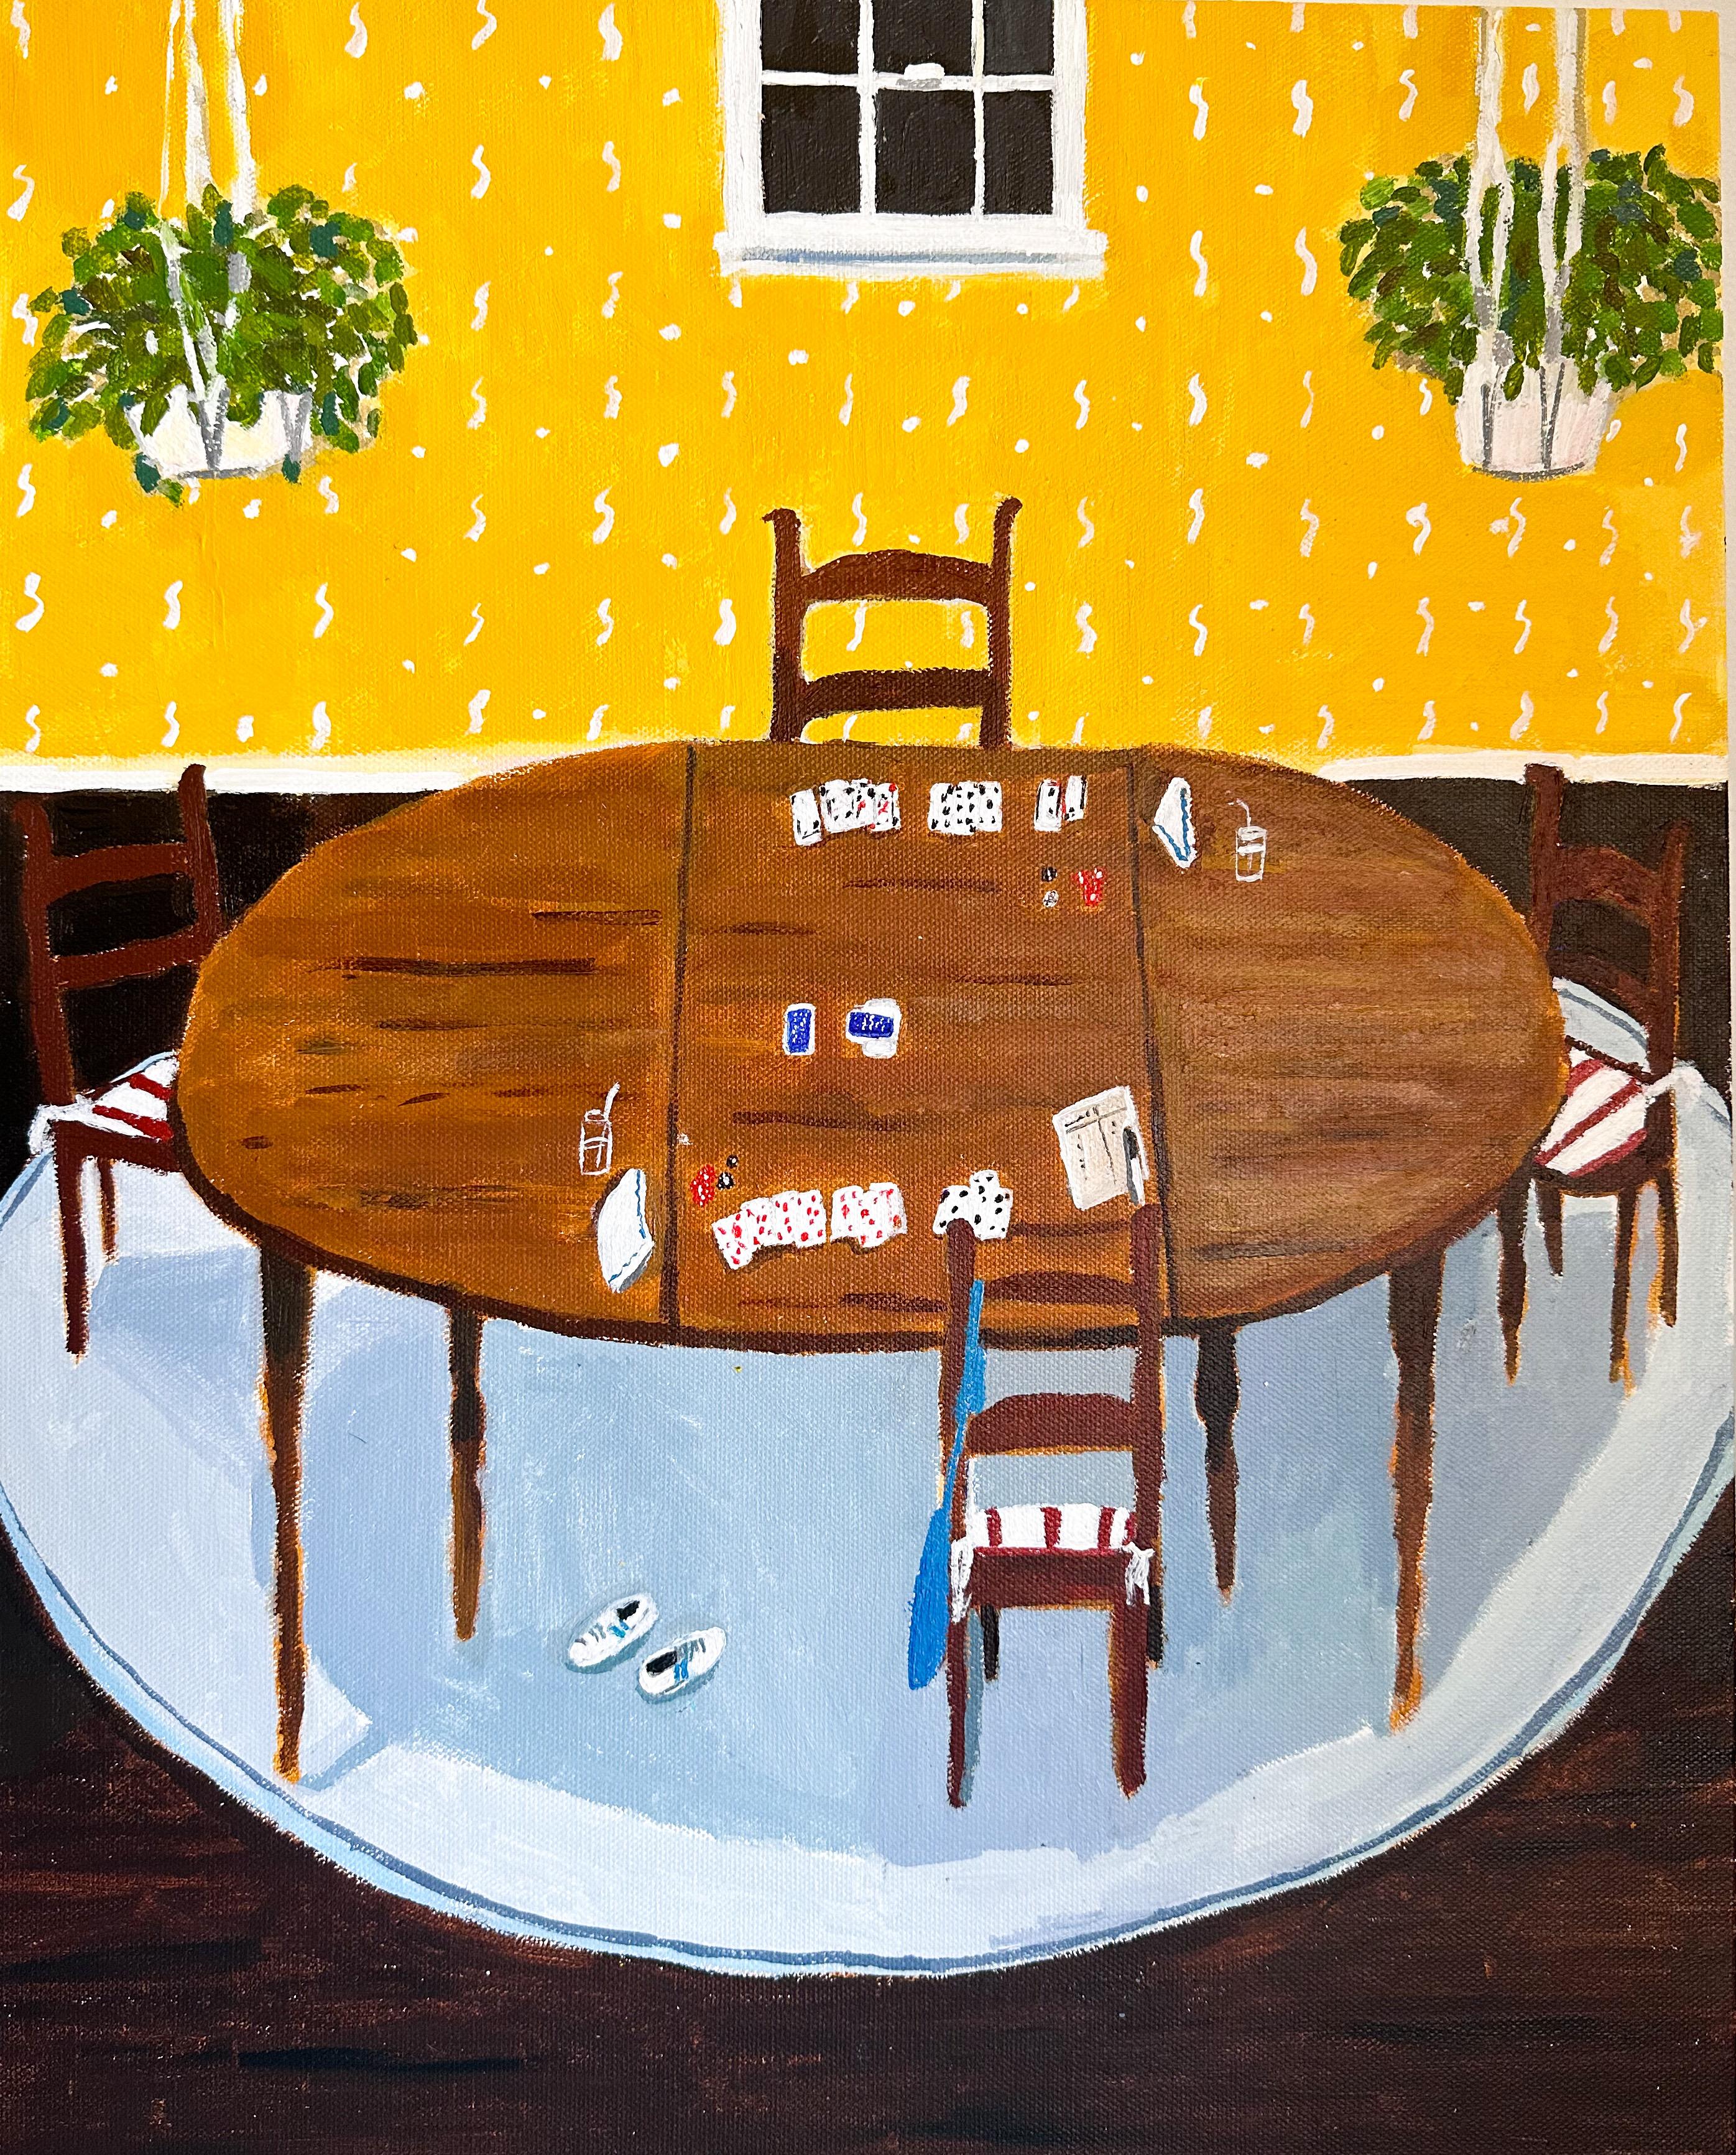 Polly Shindler Interior Painting - Gin Game in Yellow Room, Dining, Wooden Table, Chairs, Card Game, Green Plants